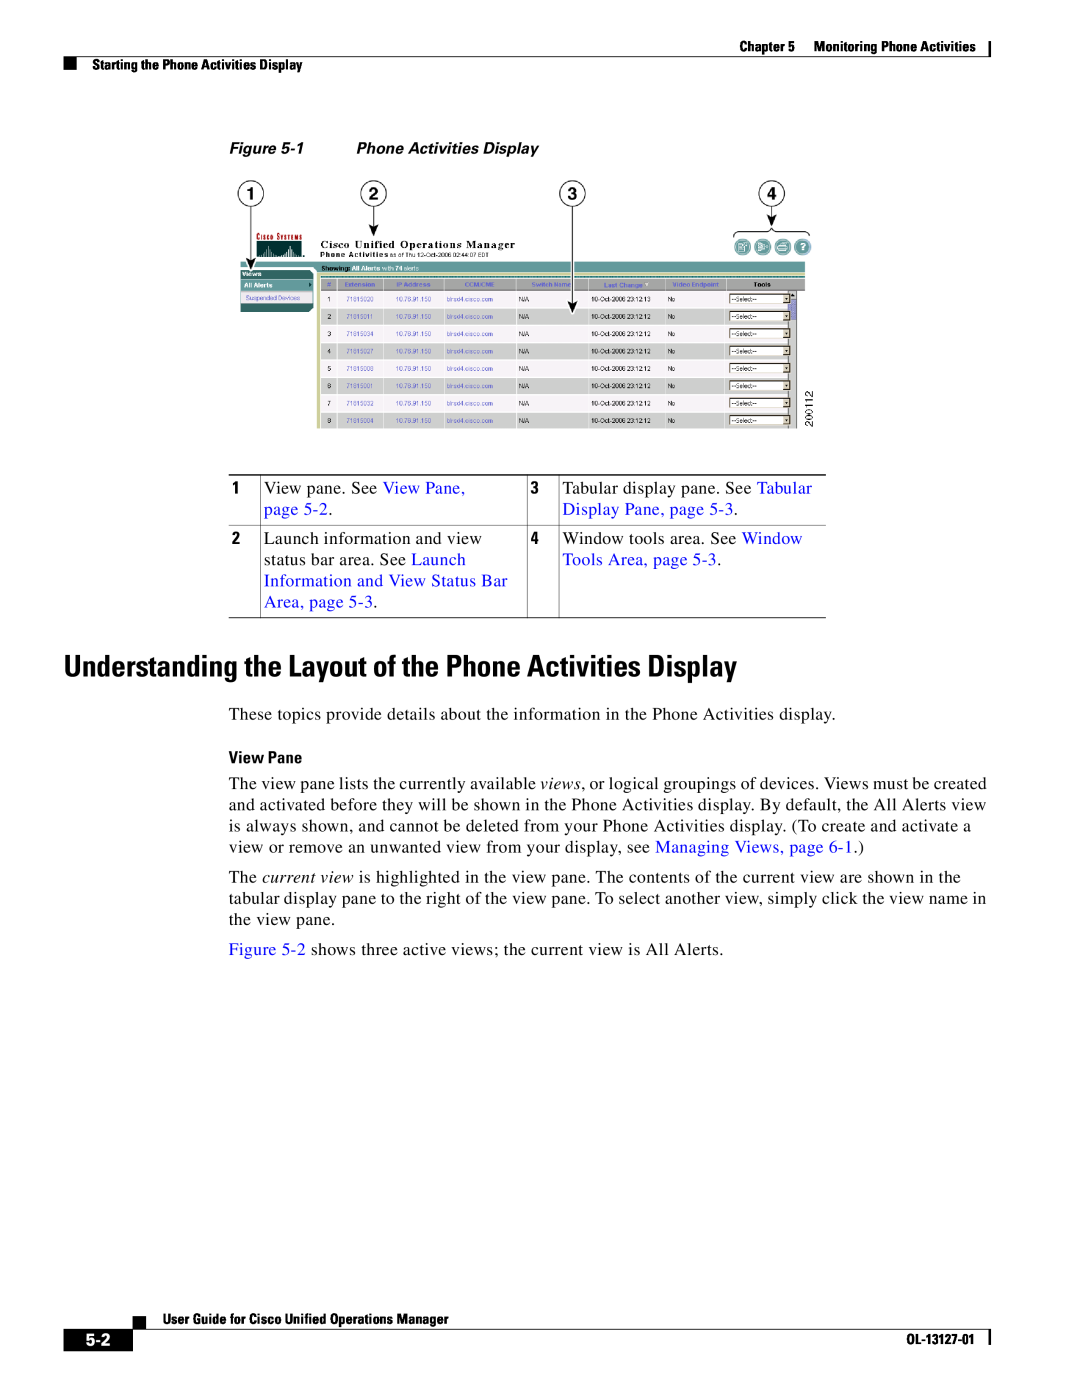 Cisco Systems OL-13127-01 manual Understanding the Layout of the Phone Activities Display, View pane. See View Pane, page 